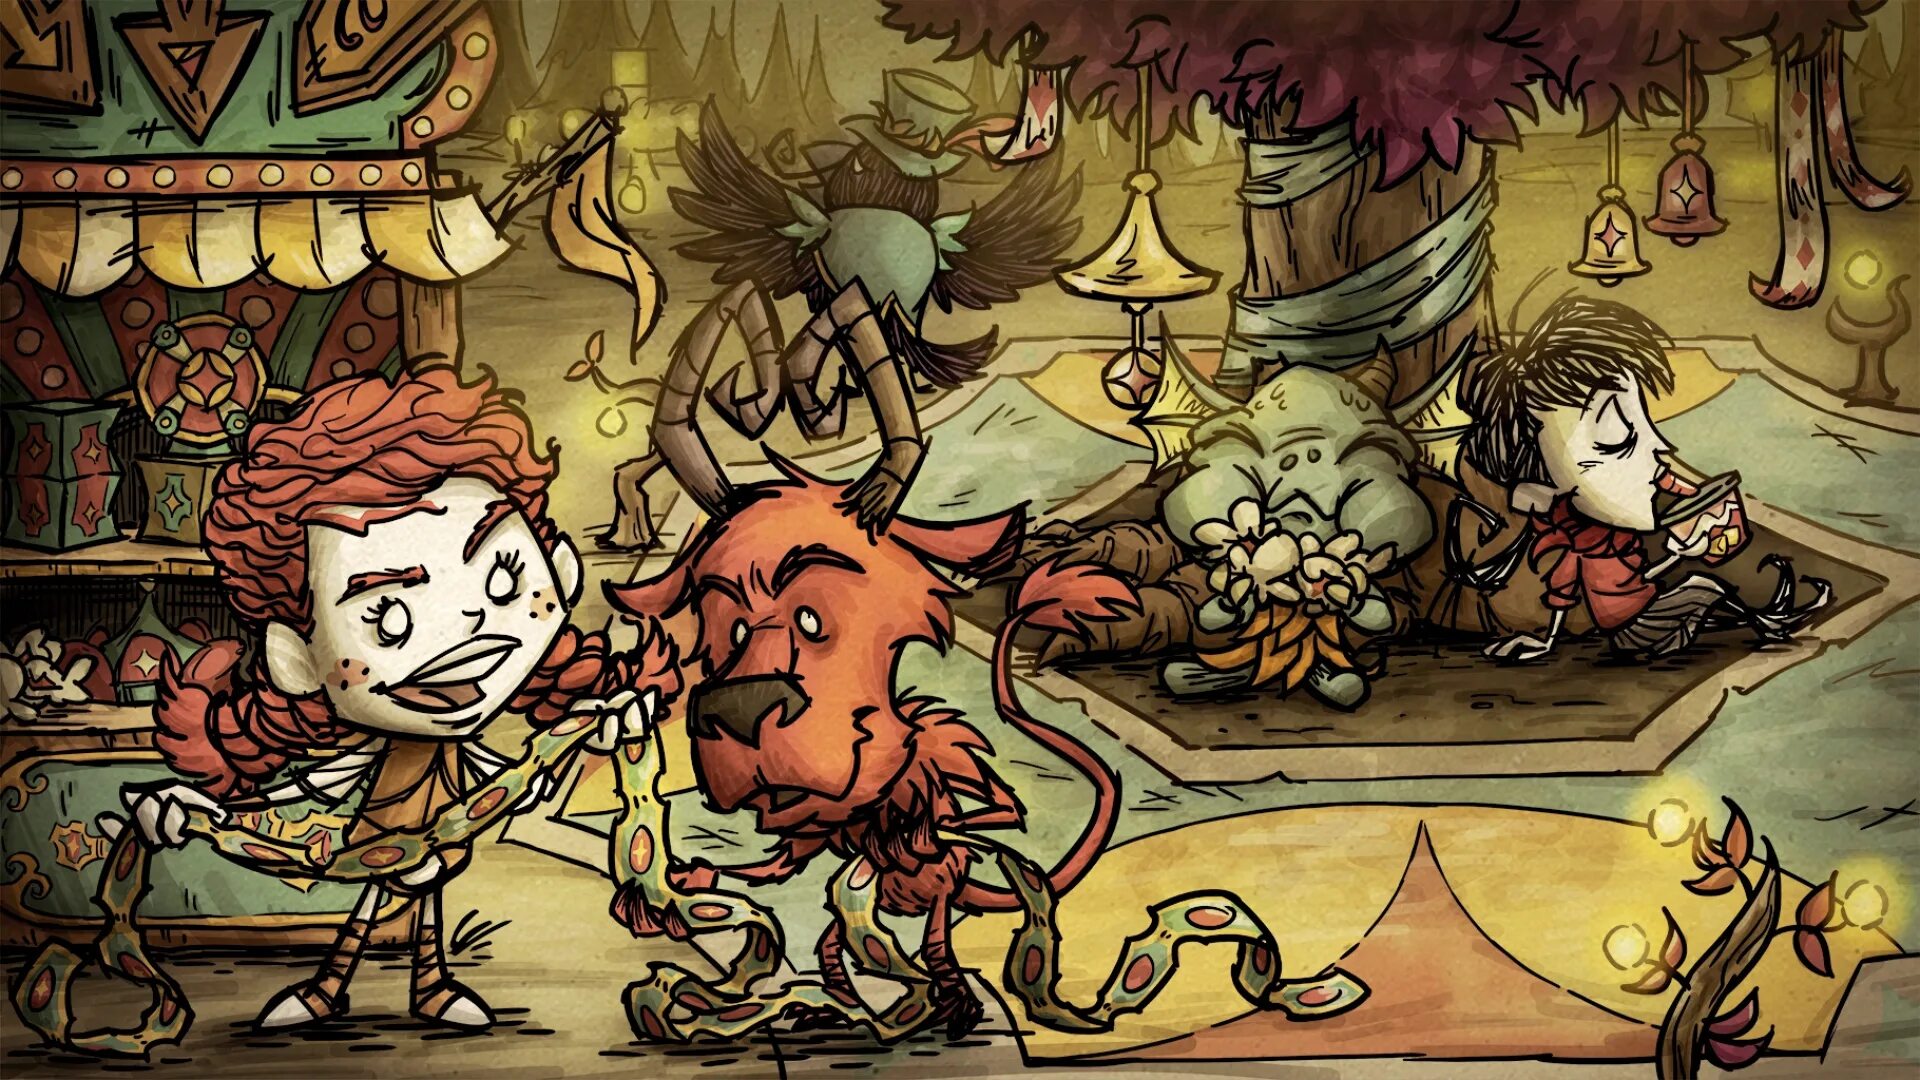 Don t starve starving games. Don't Starve игра. Don't Starve together карнавал. Донт старв 3. Don't Starve together игрушки.